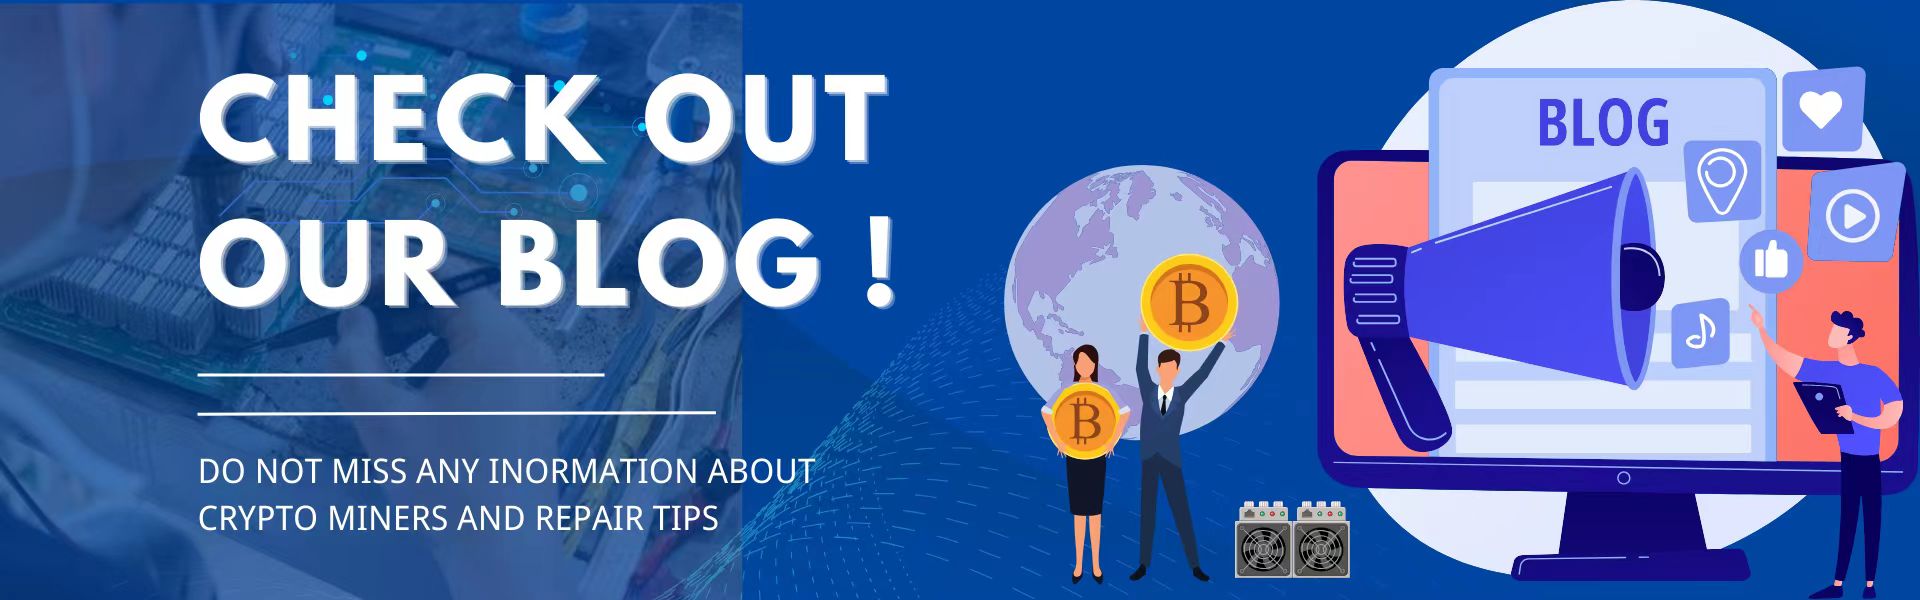 crypto mining bitcoin miner blog repair tips whatsminer antminer innosilicon article